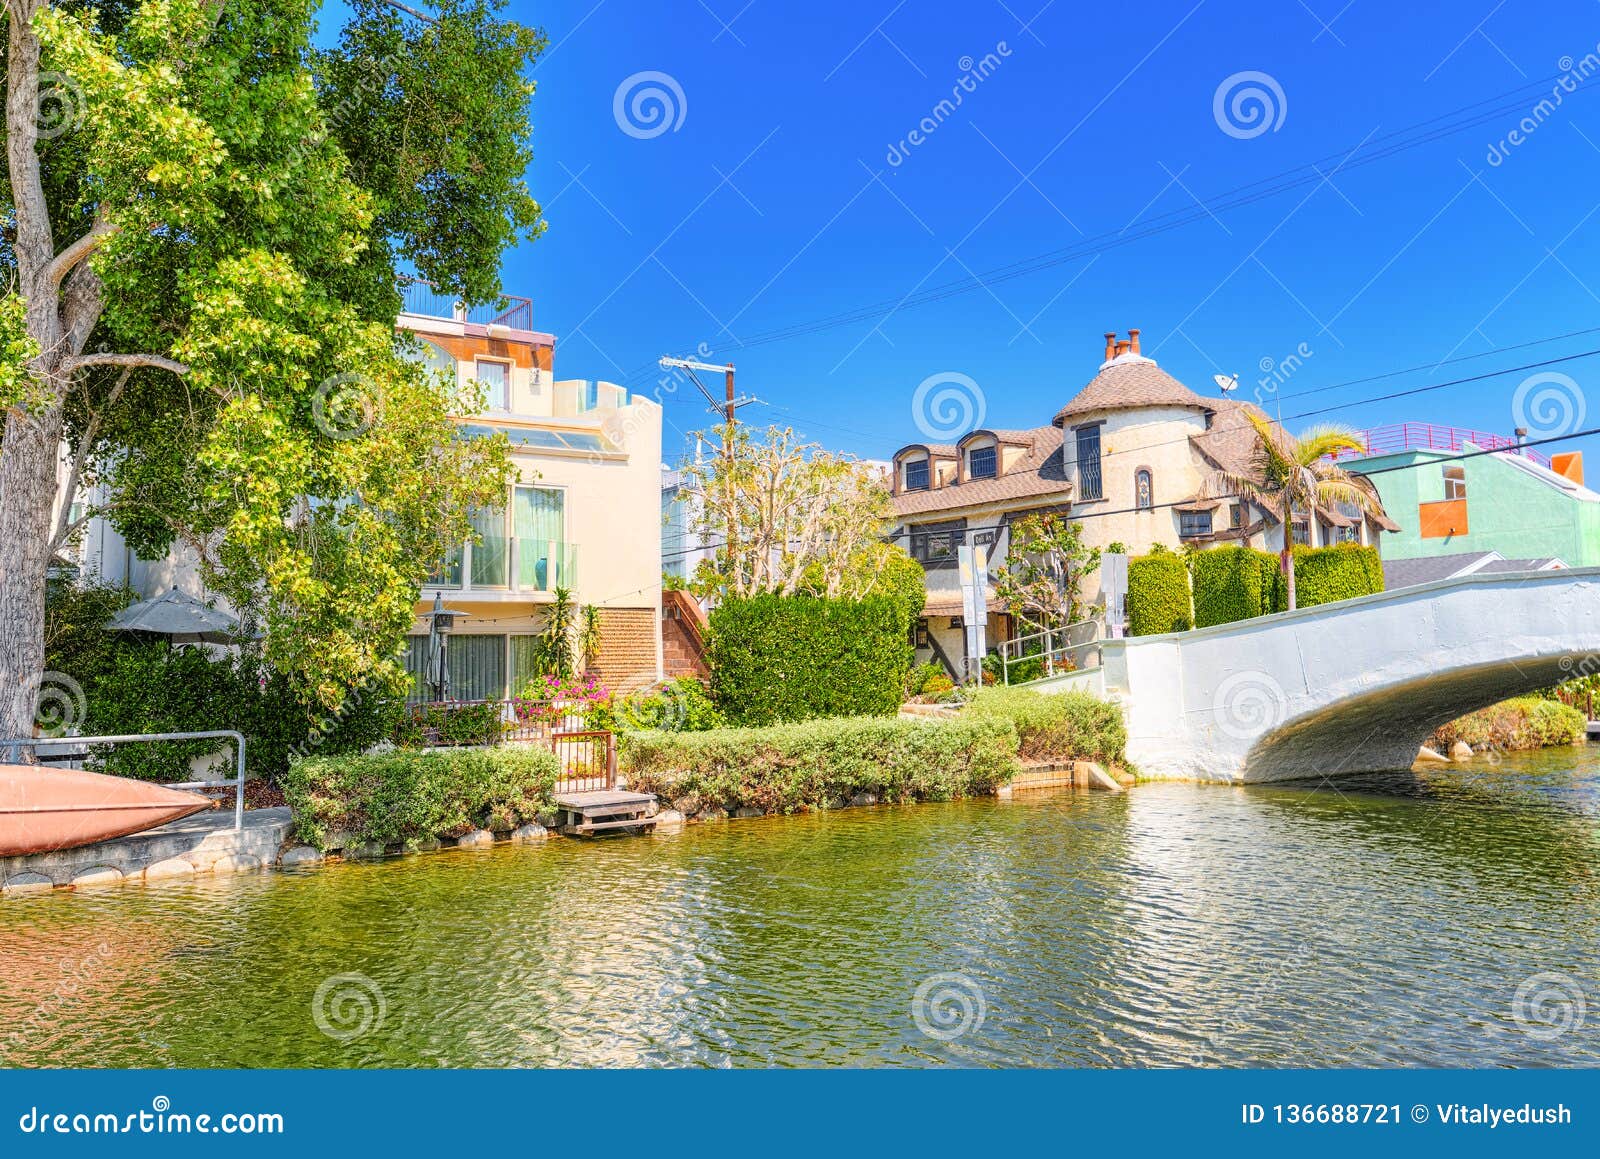 one of the most beautiful district of los angeles - is venice. california